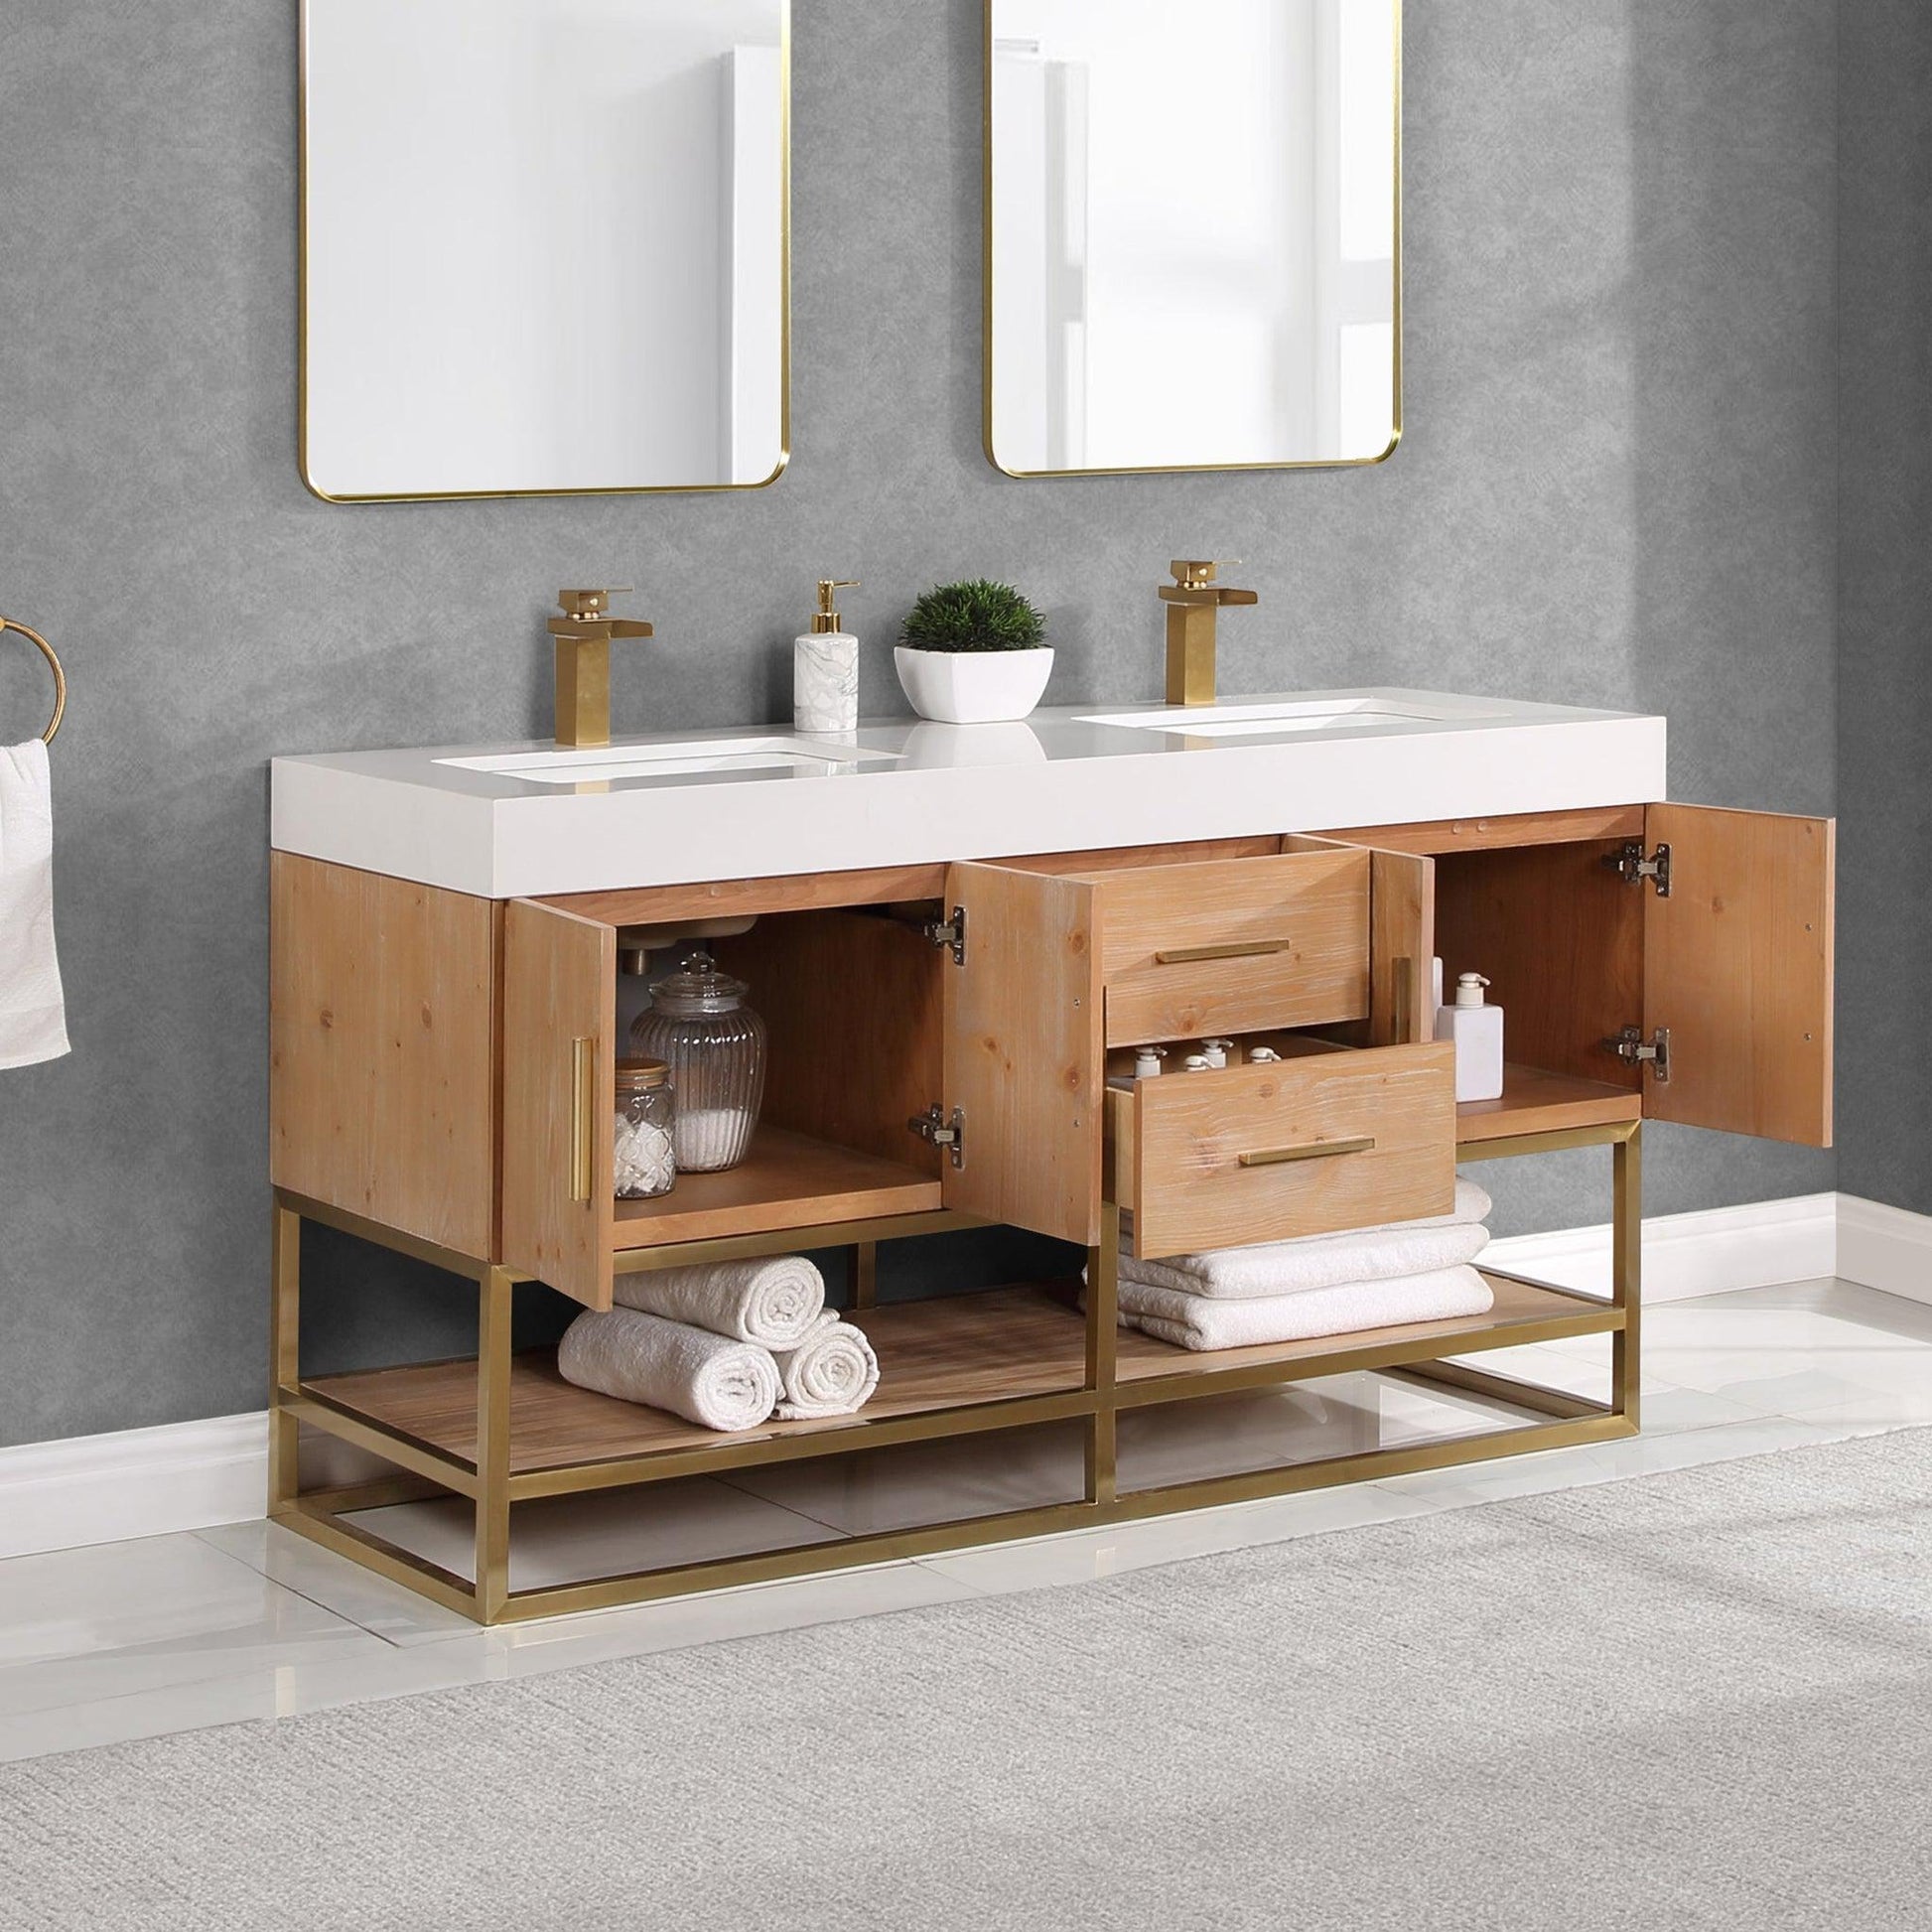 https://usbathstore.com/cdn/shop/files/Altair-Bianco-60-Light-Brown-Freestanding-Double-Bathroom-Vanity-Set-With-Brushed-Gold-Support-Base-White-Composite-Stone-Top-Two-Rectangular-Undermount-Ceramic-Sinks-and-Overflow-4.jpg?v=1688378219&width=1946